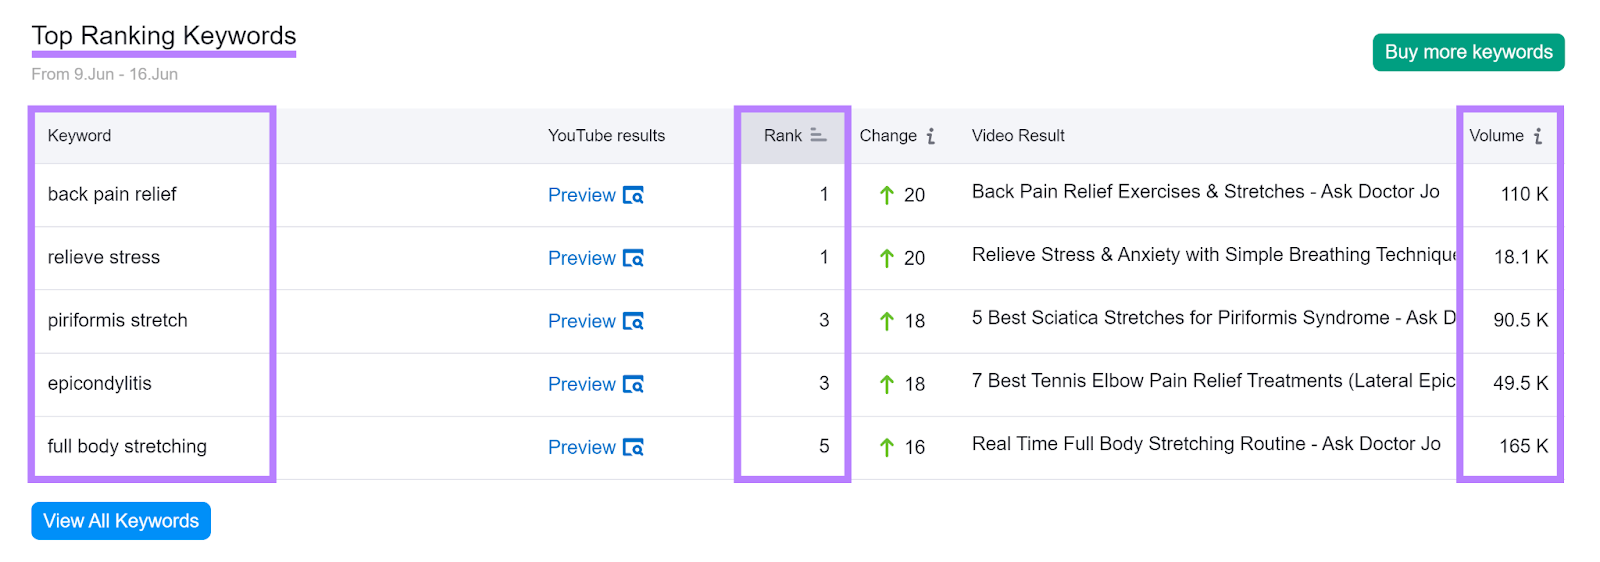 Top Ranking Keywords section with Keyword, Rank, and Volume columns highlighted.